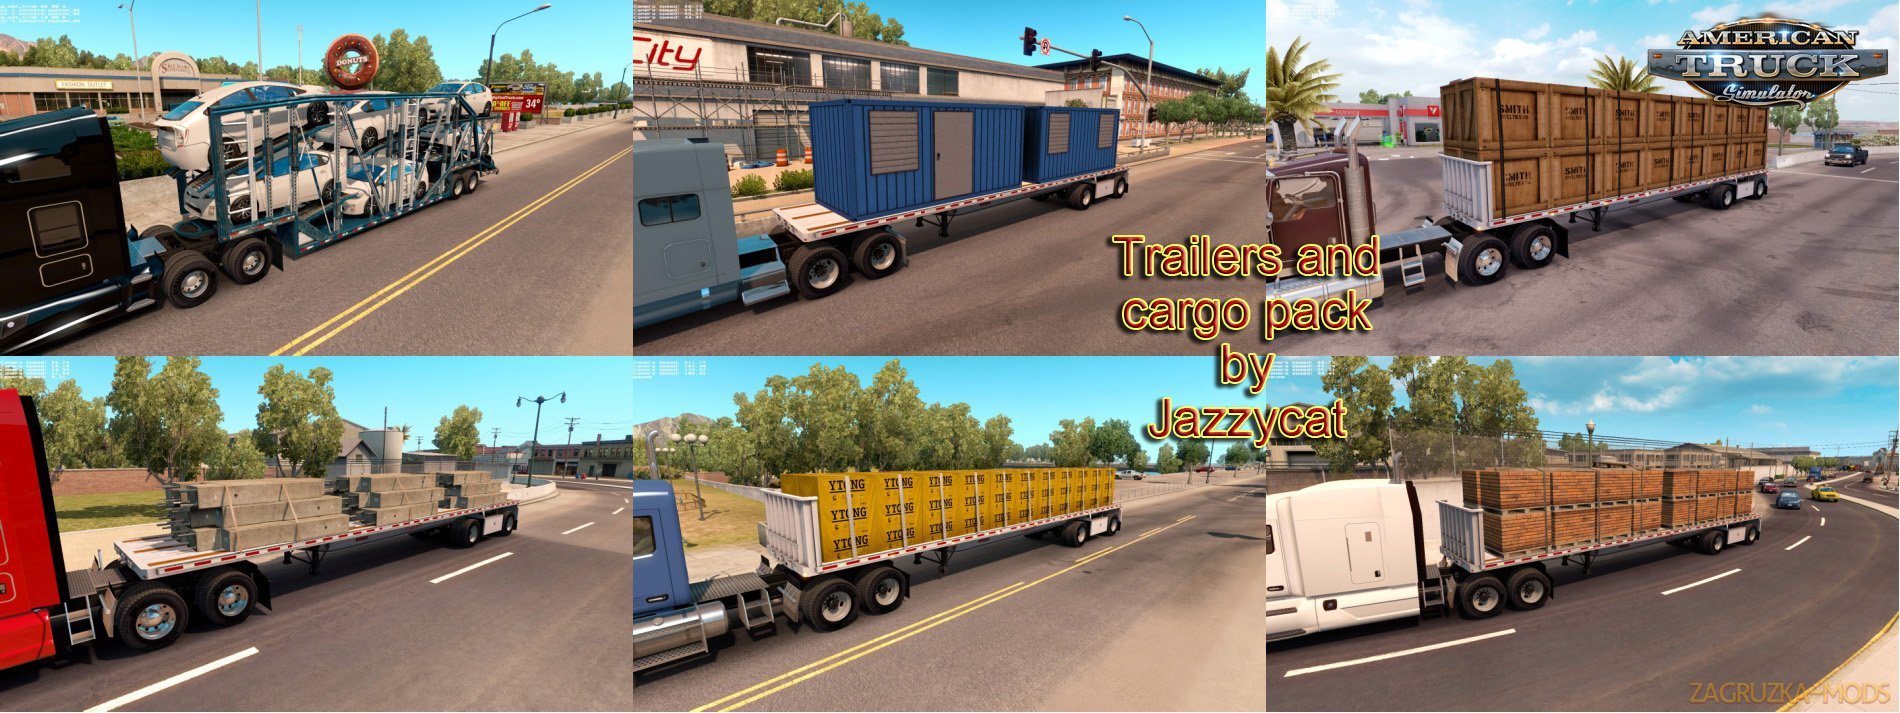 Trailers and Cargo Pack v1.5 by Jazzycat